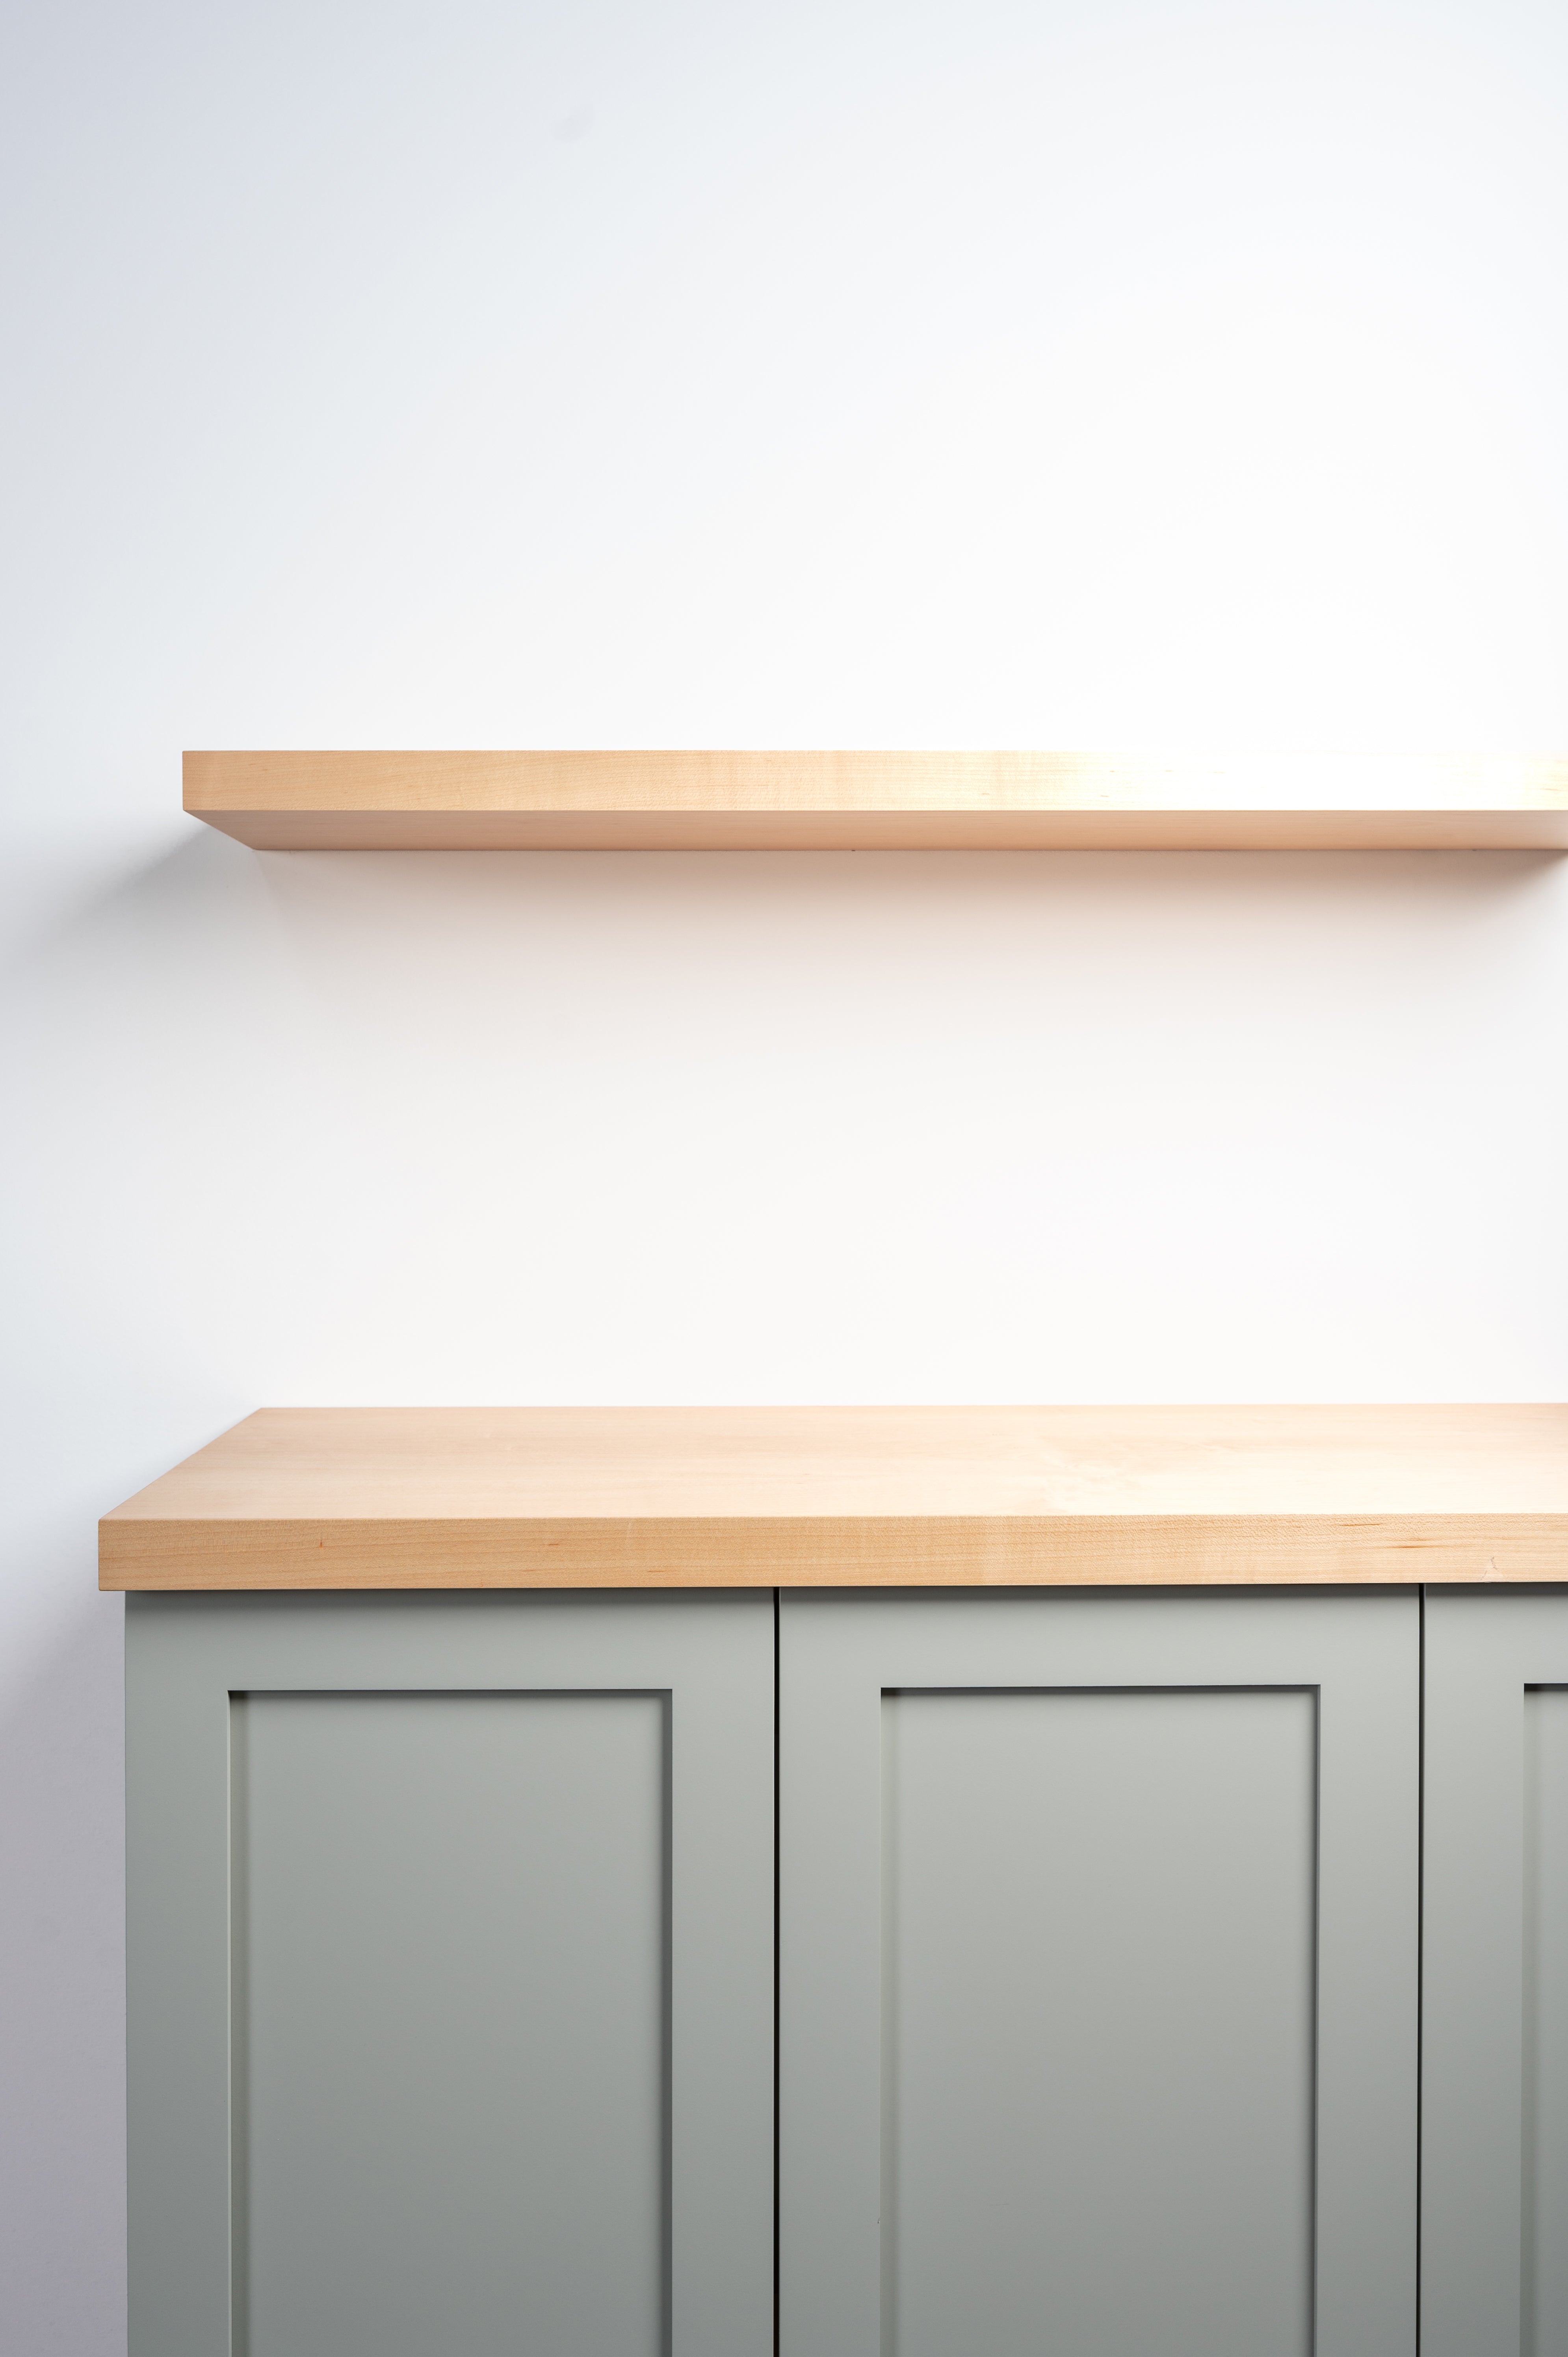 Maple 4.1-6" thick Cabinet Top / Slab Shelf